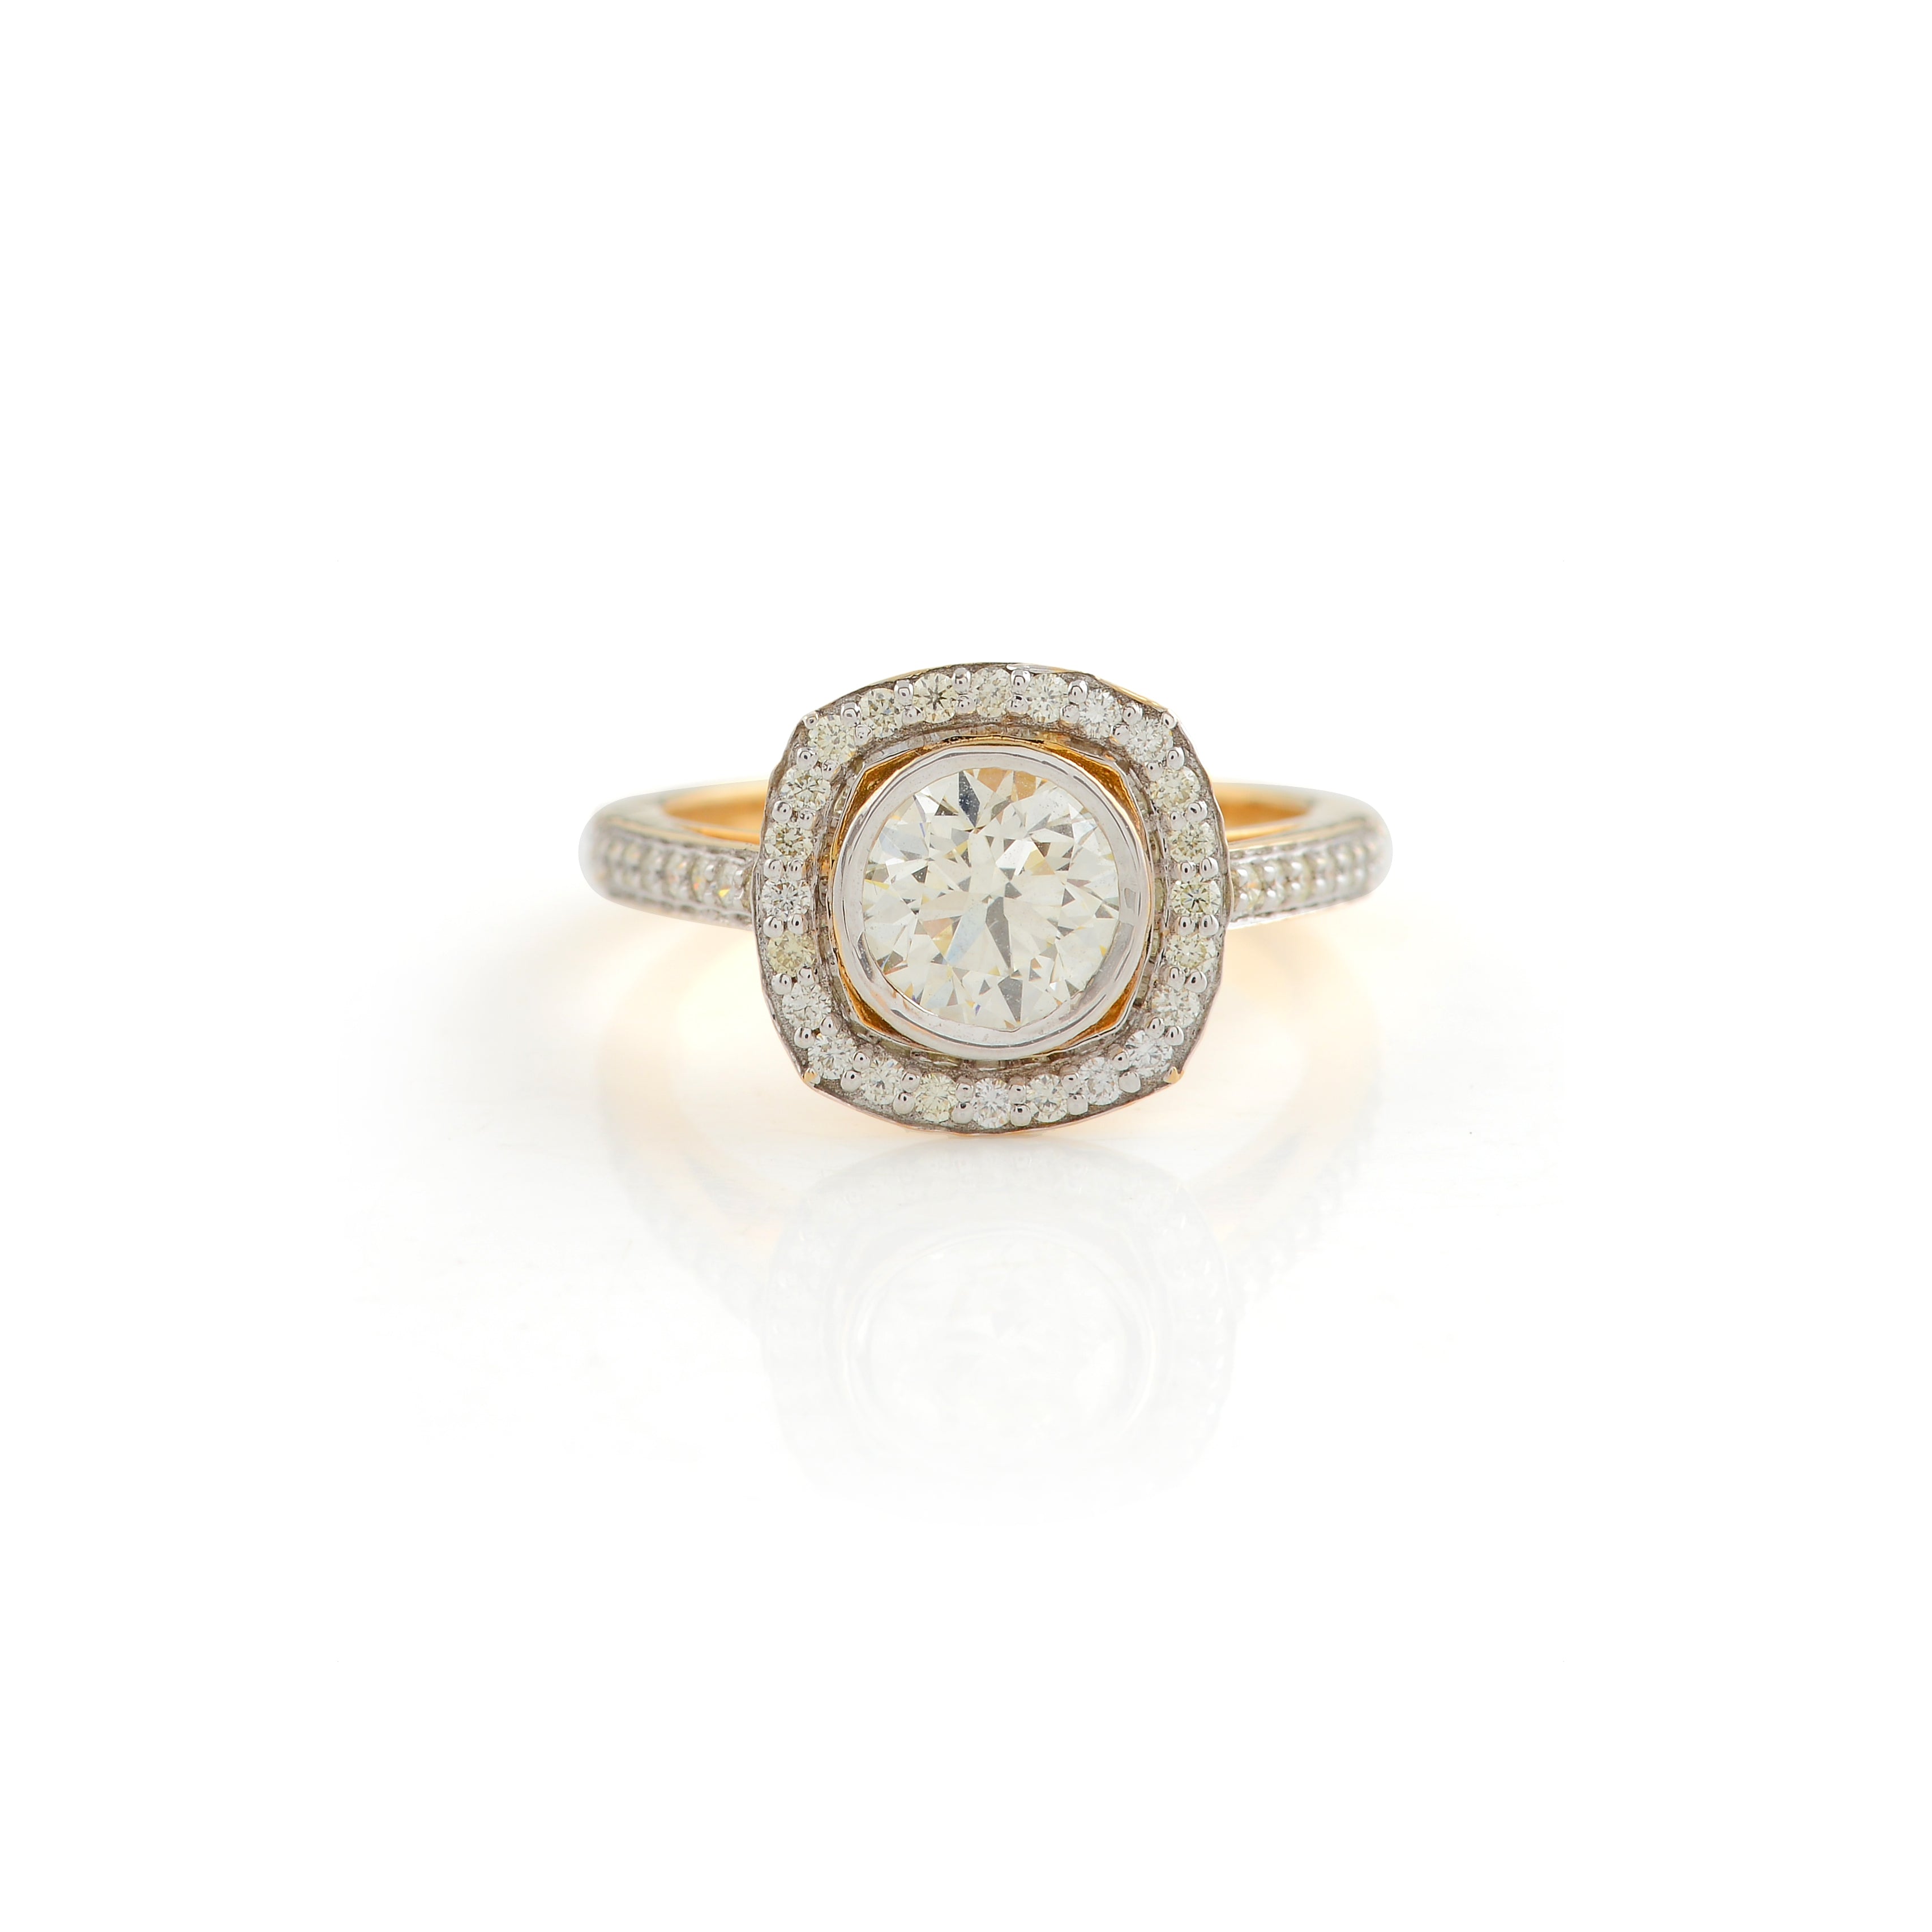 Squaricle Solitaire Diamond Ring